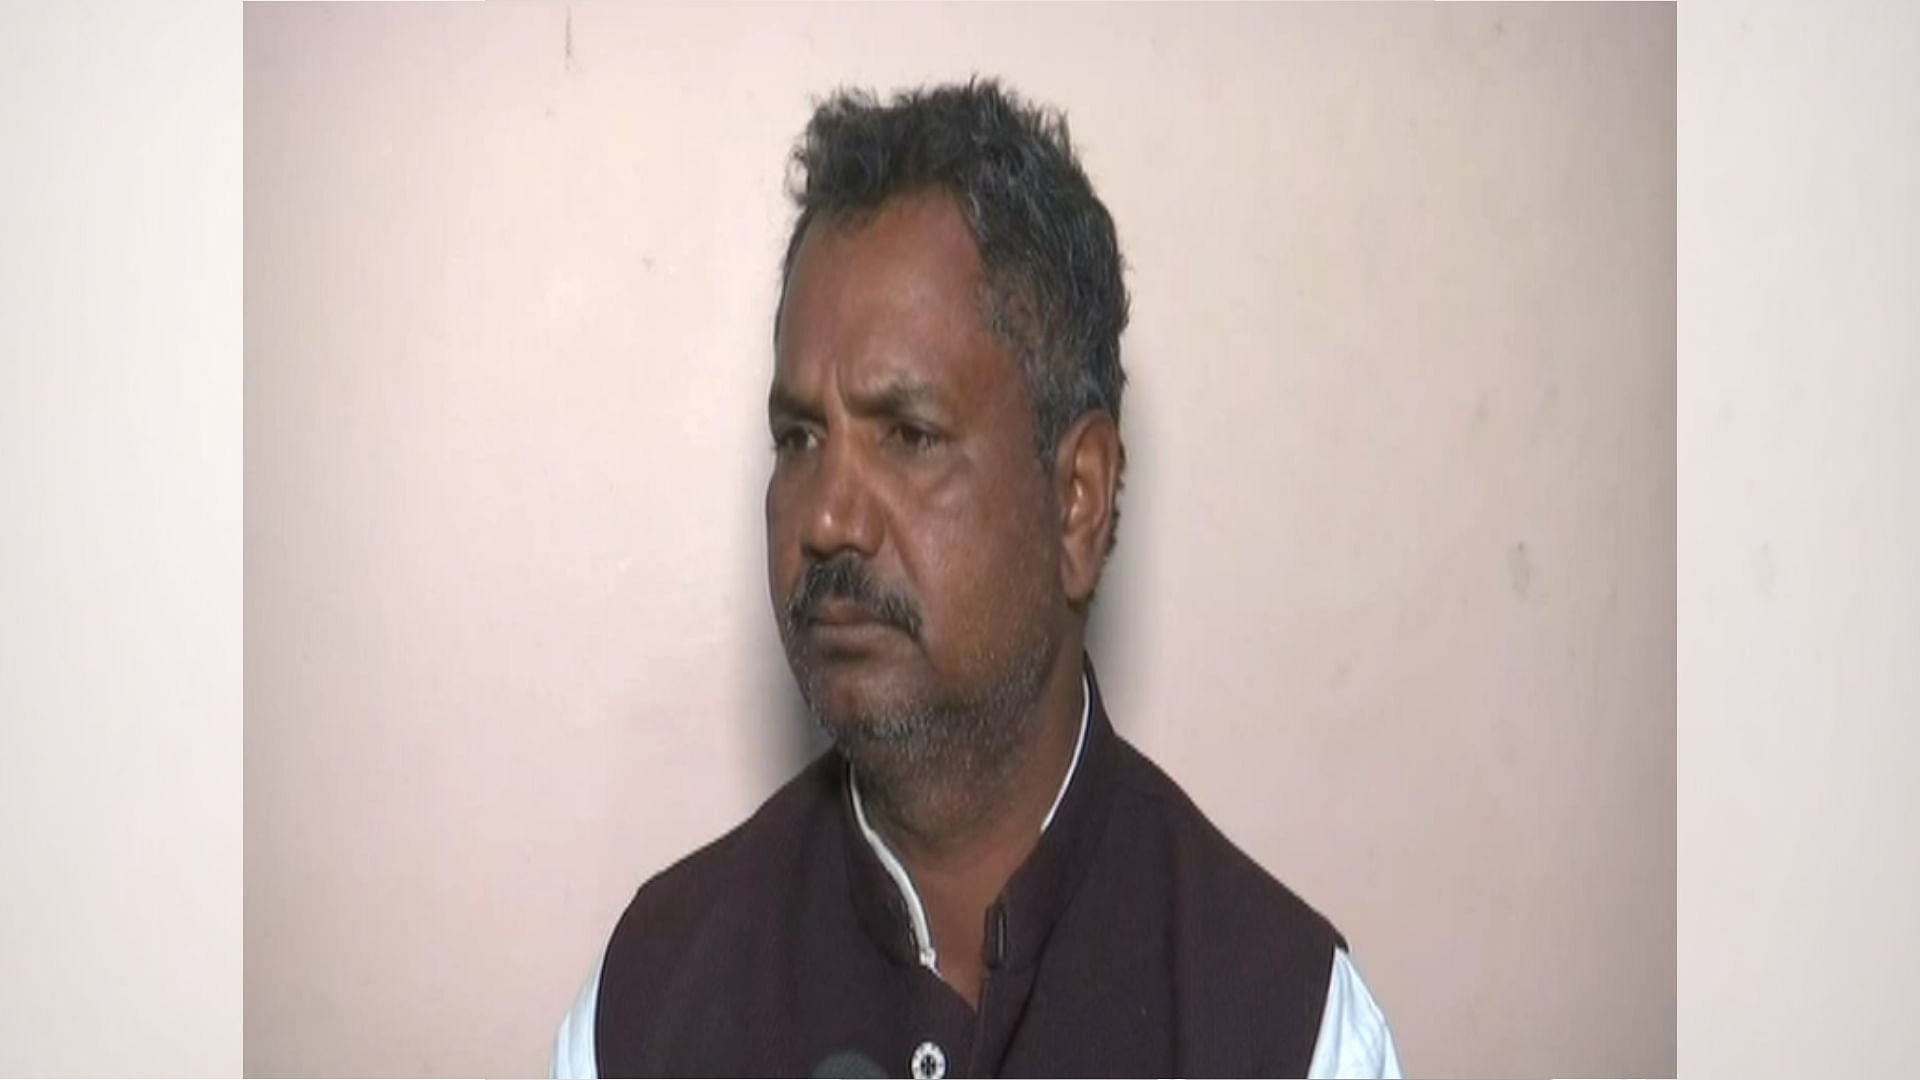 Arjun Kashyap, the general secretary of the Rashtriya Nishad Party and the main accused in the Ghazipur mob violence speaks to the media.